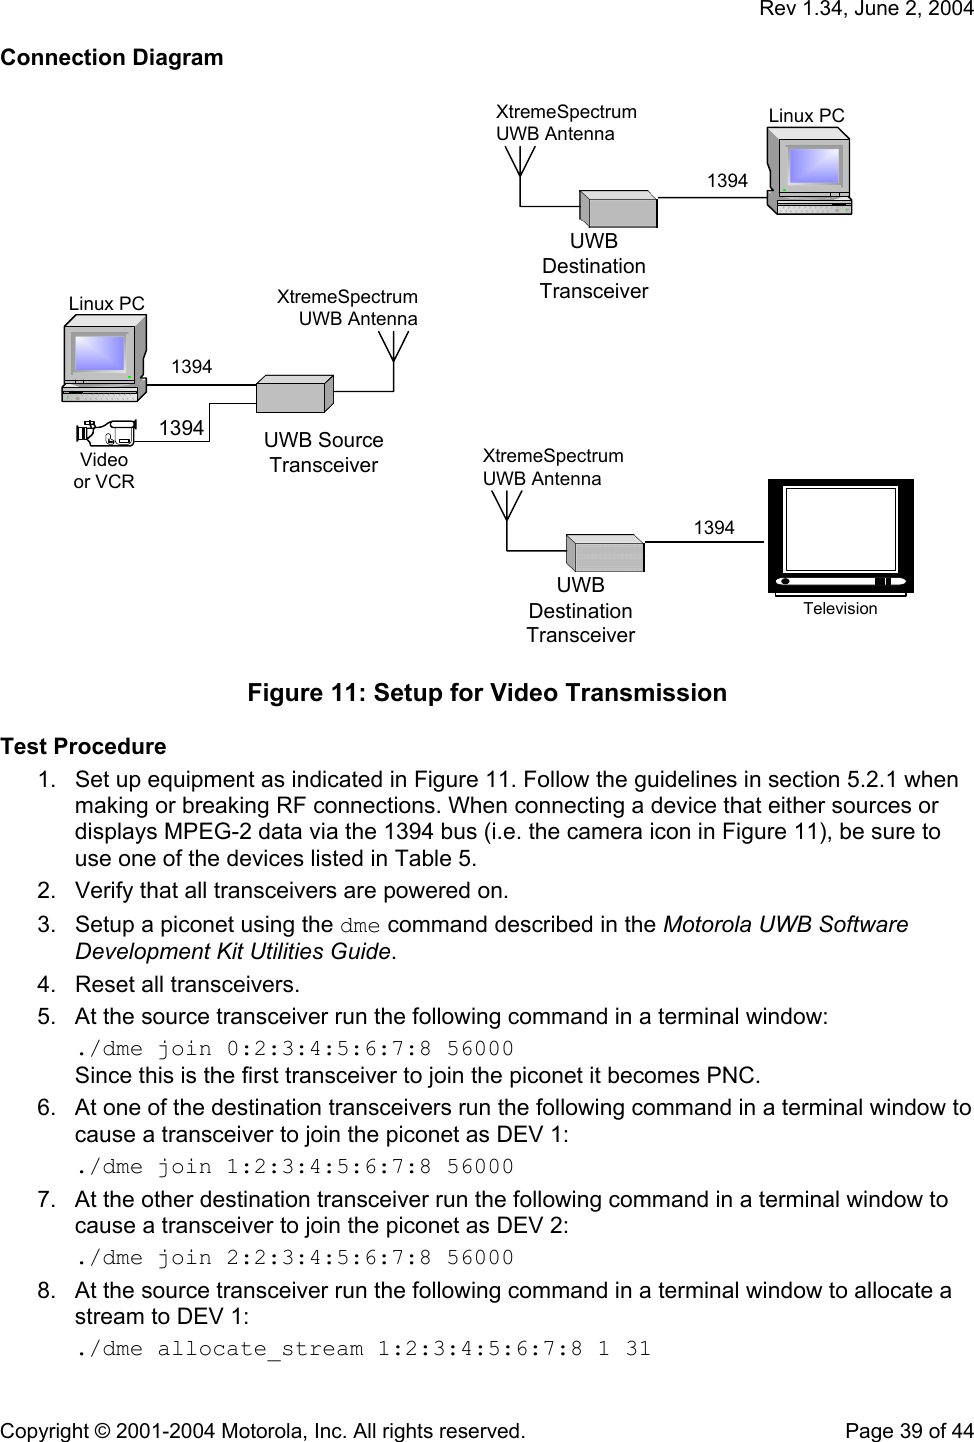   Rev 1.34, June 2, 2004  Copyright © 2001-2004 Motorola, Inc. All rights reserved.    Page 39 of 44 Connection Diagram  Linux PC1394UWB SourceTransceiverXtremeSpectrumUWB AntennaLinux PC1394UWBDestinationTransceiverXtremeSpectrumUWB Antenna1394Videoor VCR1394UWBDestinationTransceiverXtremeSpectrumUWB AntennaTelevision  Figure 11: Setup for Video Transmission  Test Procedure 1.  Set up equipment as indicated in Figure 11. Follow the guidelines in section 5.2.1 when making or breaking RF connections. When connecting a device that either sources or displays MPEG-2 data via the 1394 bus (i.e. the camera icon in Figure 11), be sure to use one of the devices listed in Table 5. 2.  Verify that all transceivers are powered on. 3.  Setup a piconet using the dme command described in the Motorola UWB Software Development Kit Utilities Guide. 4.  Reset all transceivers. 5.  At the source transceiver run the following command in a terminal window: ./dme join 0:2:3:4:5:6:7:8 56000 Since this is the first transceiver to join the piconet it becomes PNC. 6.  At one of the destination transceivers run the following command in a terminal window to cause a transceiver to join the piconet as DEV 1: ./dme join 1:2:3:4:5:6:7:8 56000 7.  At the other destination transceiver run the following command in a terminal window to cause a transceiver to join the piconet as DEV 2: ./dme join 2:2:3:4:5:6:7:8 56000 8.  At the source transceiver run the following command in a terminal window to allocate a stream to DEV 1: ./dme allocate_stream 1:2:3:4:5:6:7:8 1 31 